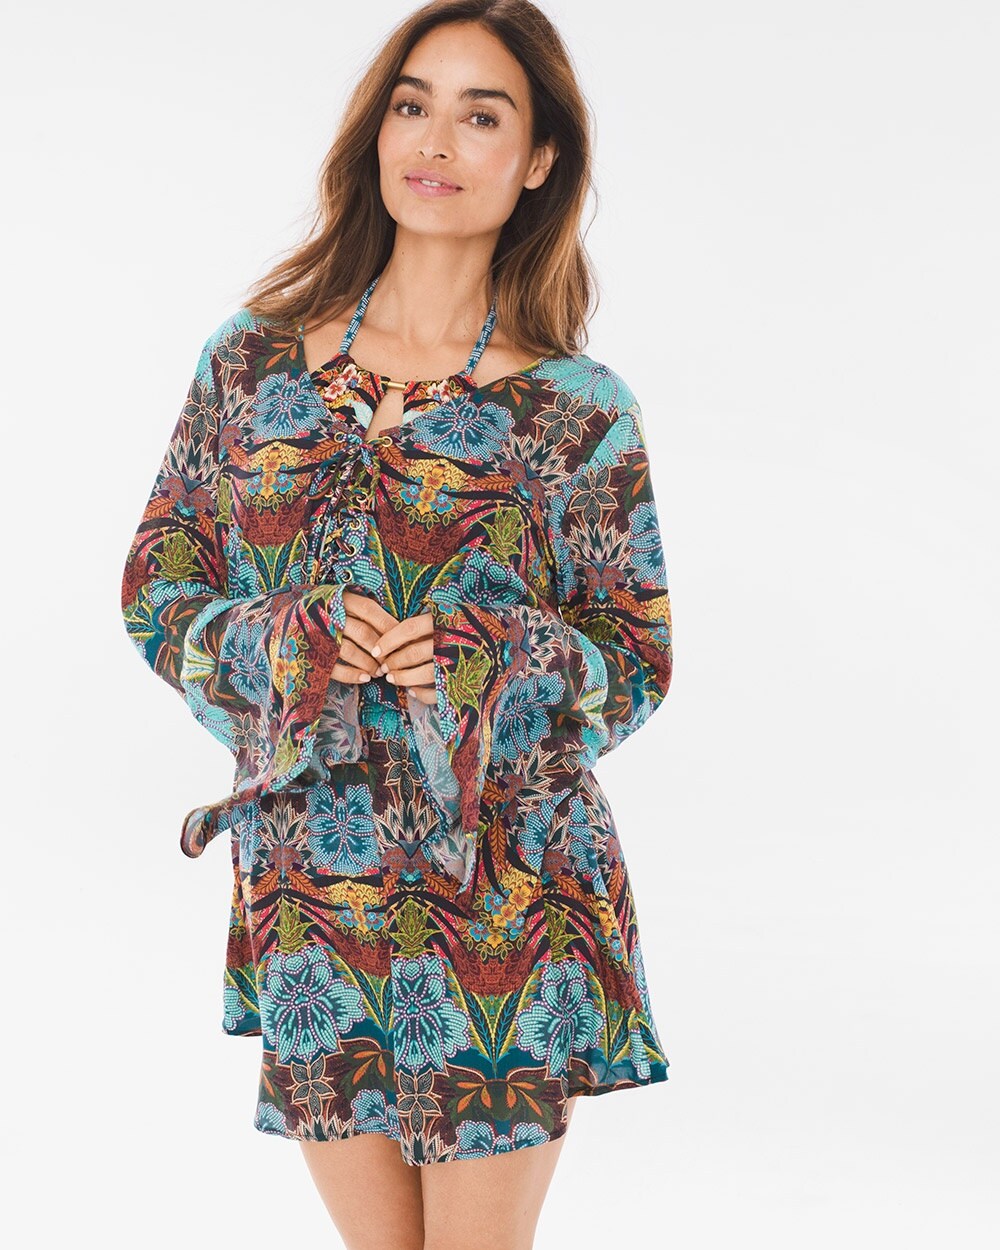 Kenneth Cole Bali Dreams Bell-Sleeve Swim Cover-Up Tunic